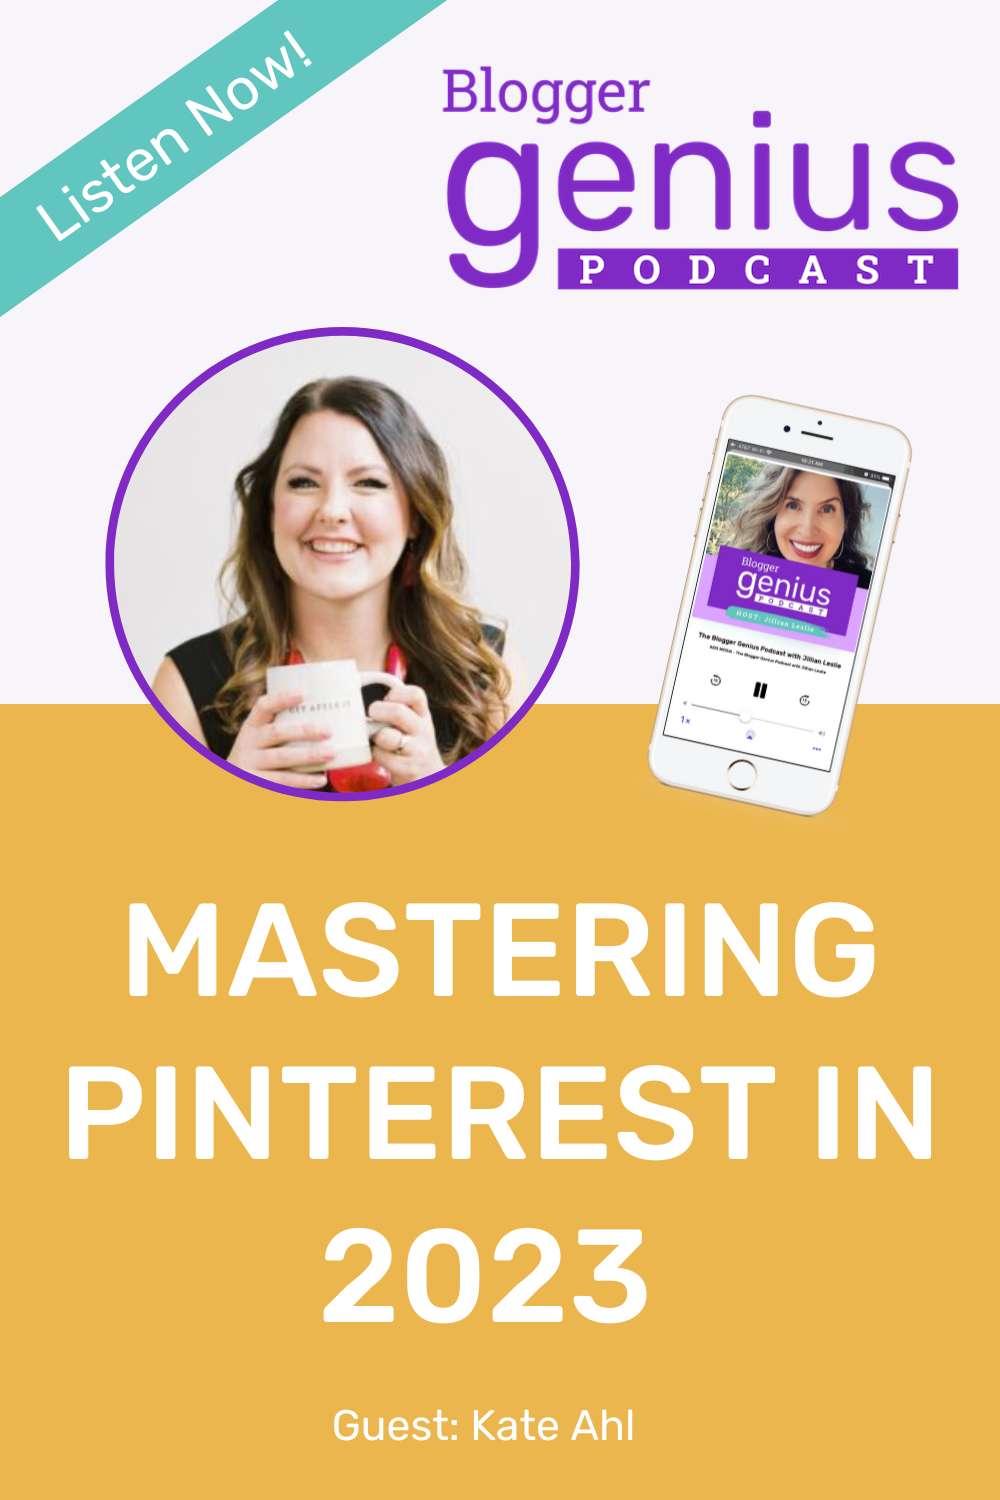 Mastering Pinterest in 2023: Secrets from a Pinterest Expert (Rebroadcast) | The Blogger Genius Podcast with Jillian Leslie